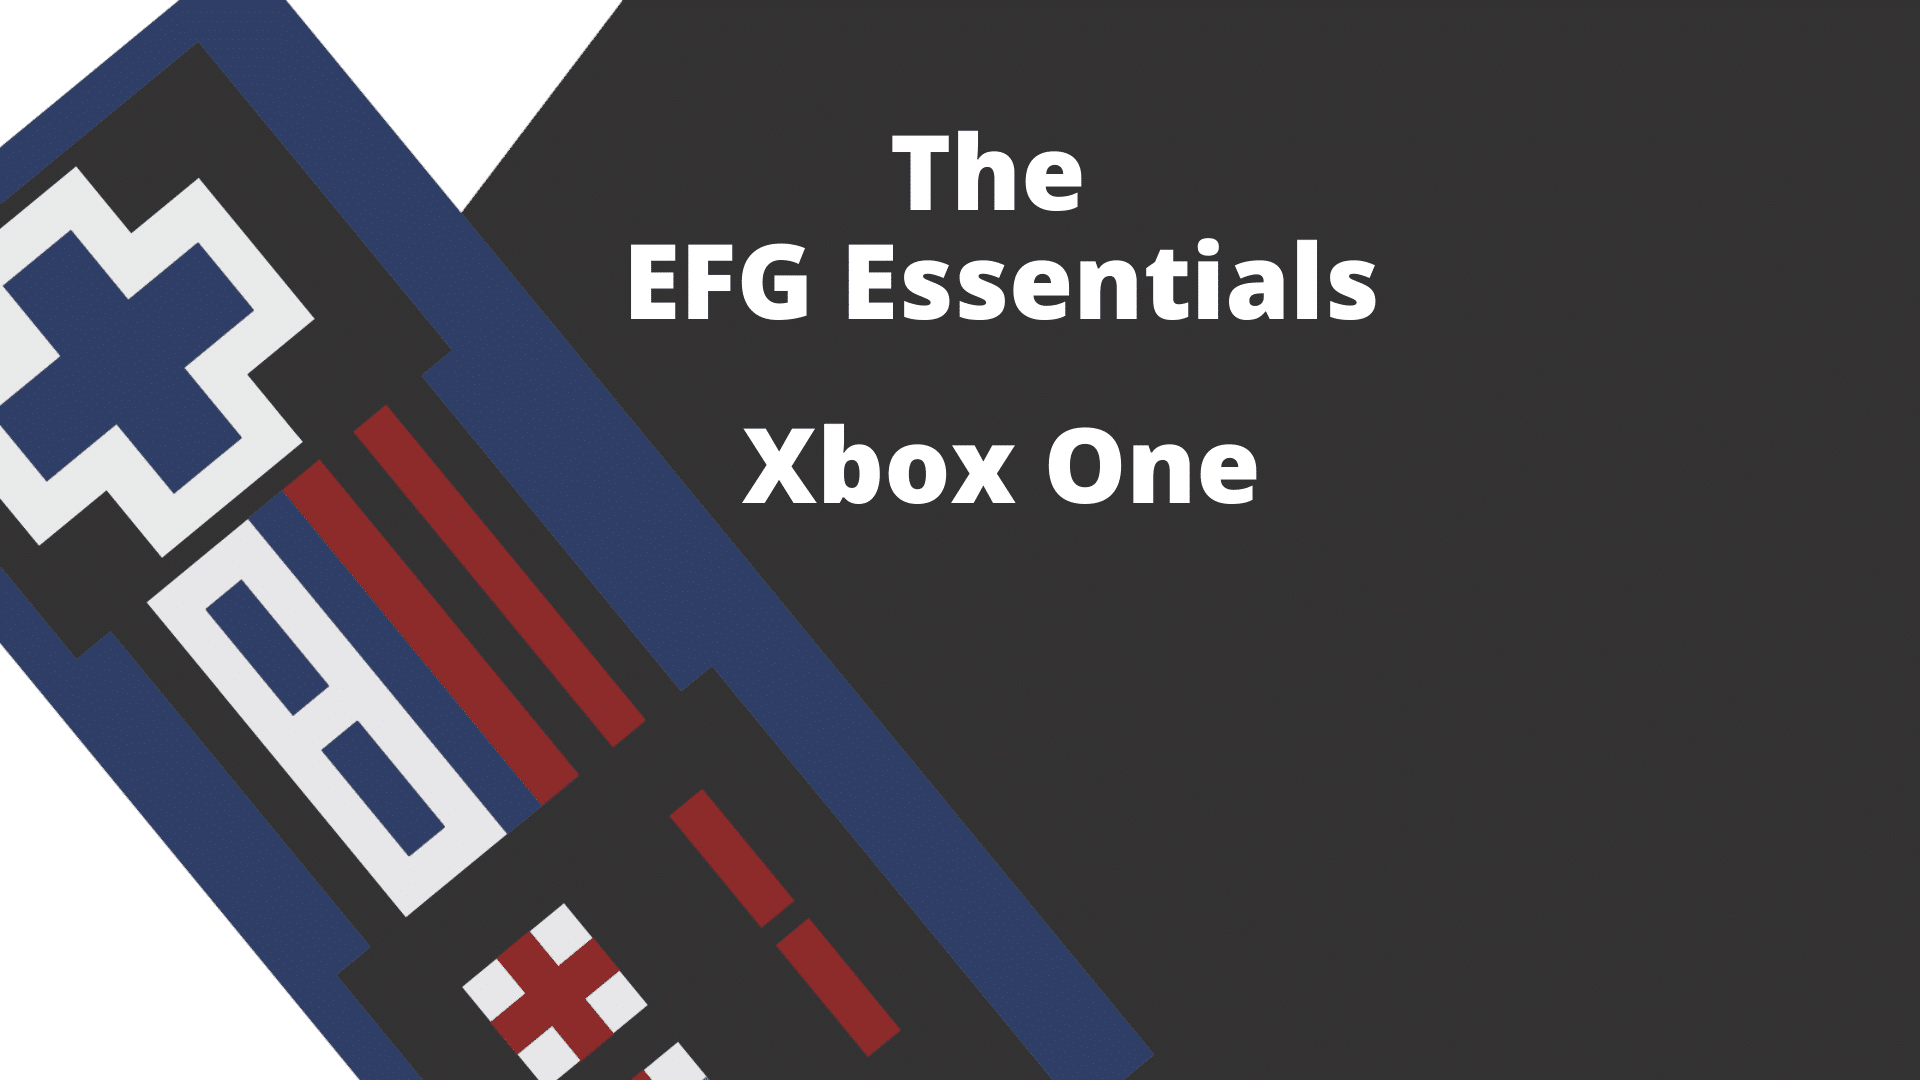 A rectangular image with a stylized image of a controller on the left and the words The EFG Essentials - Xbox One on the right